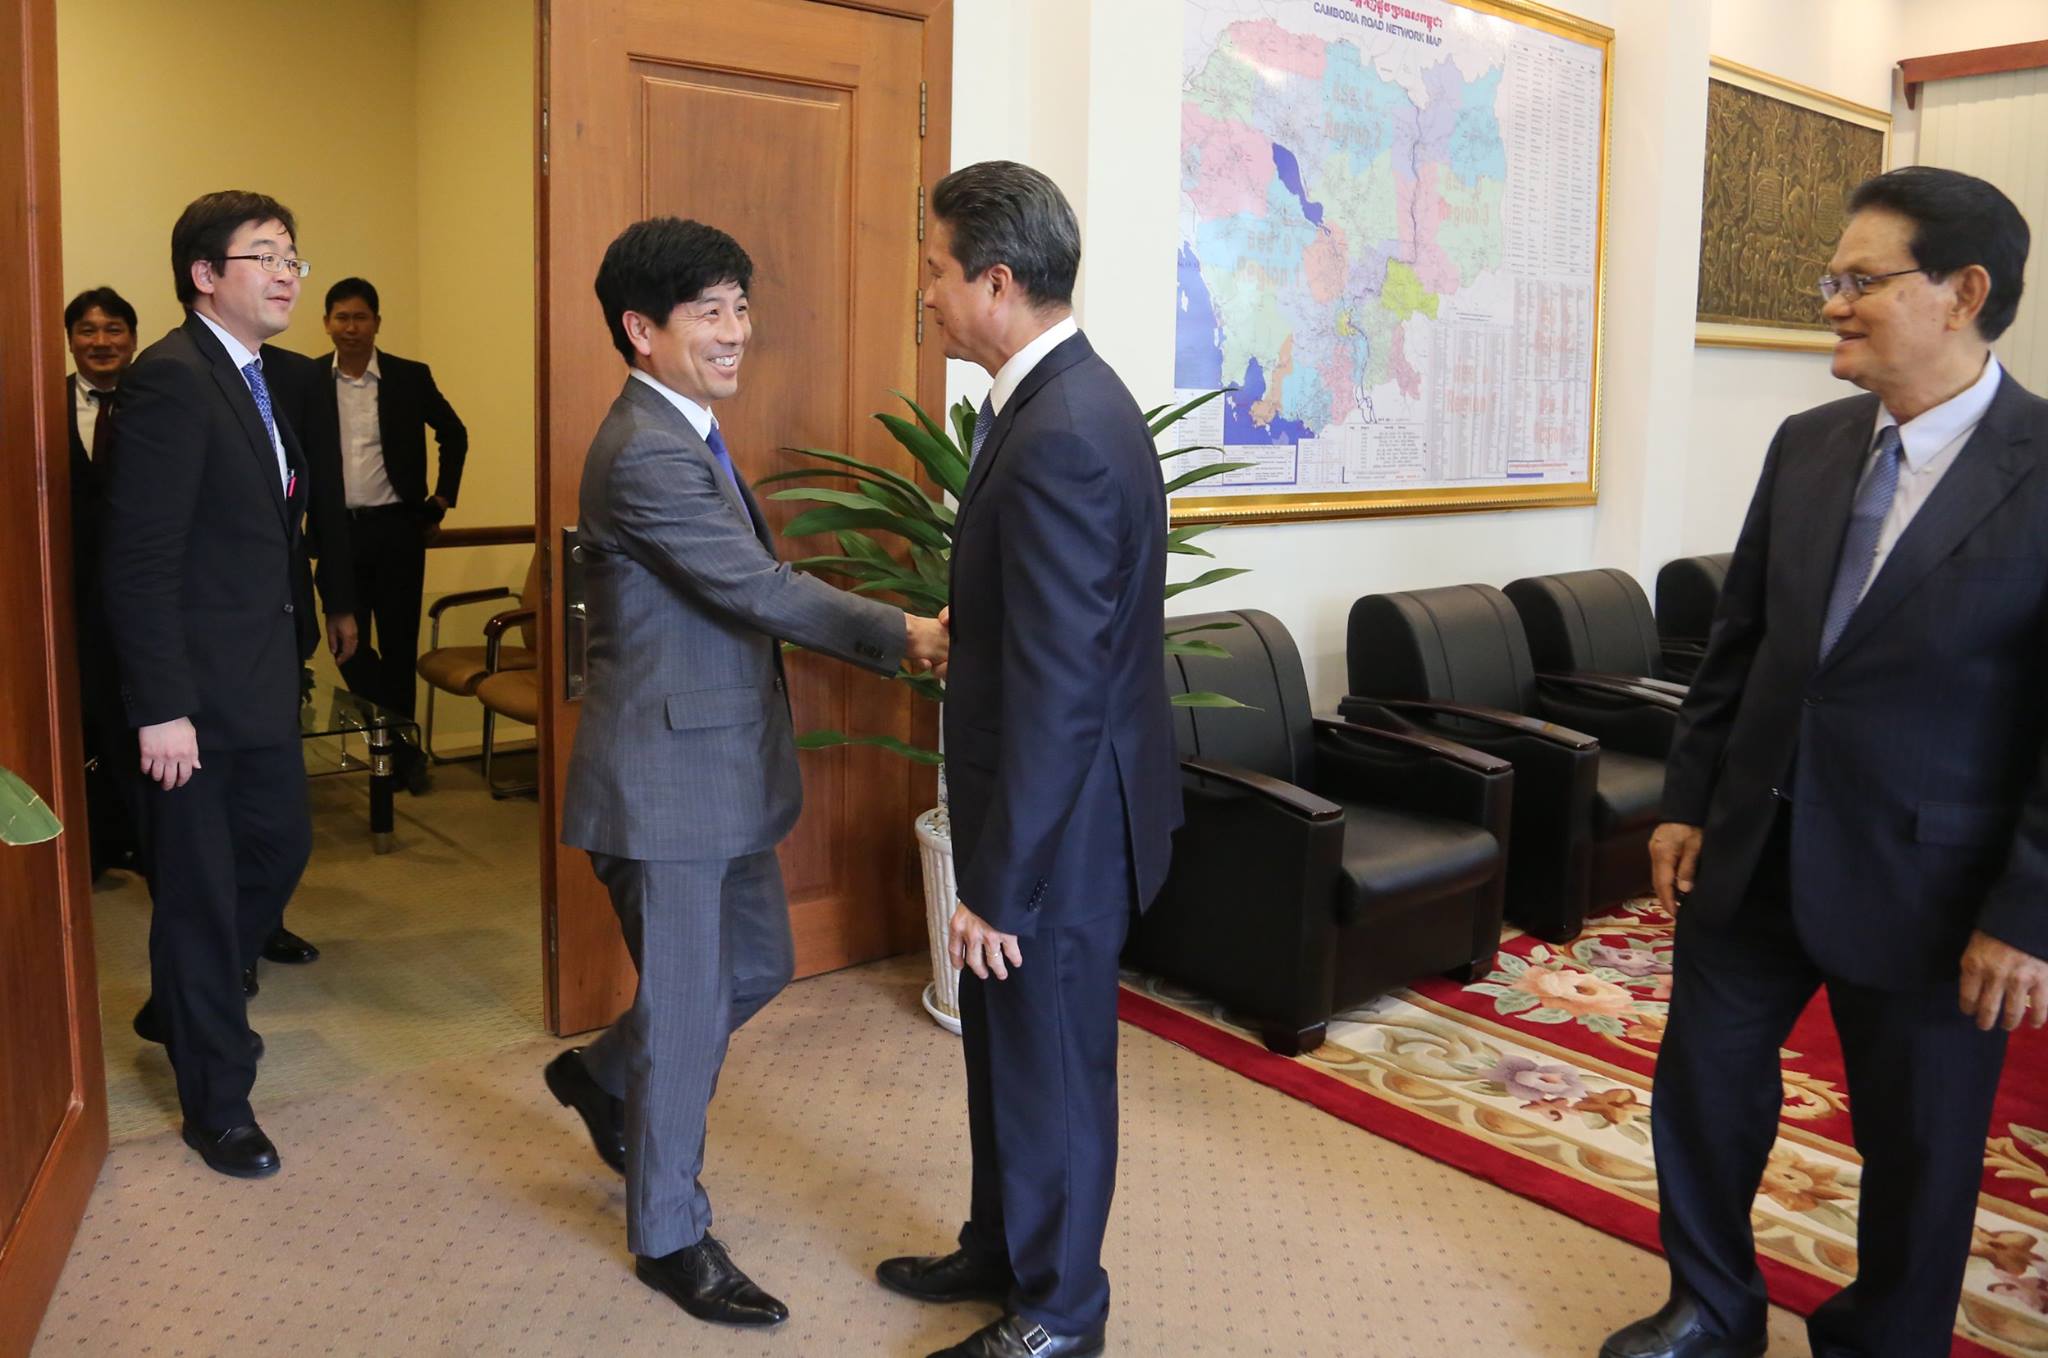 Courtesy call from State Minister of Foreign Affairs of Japan